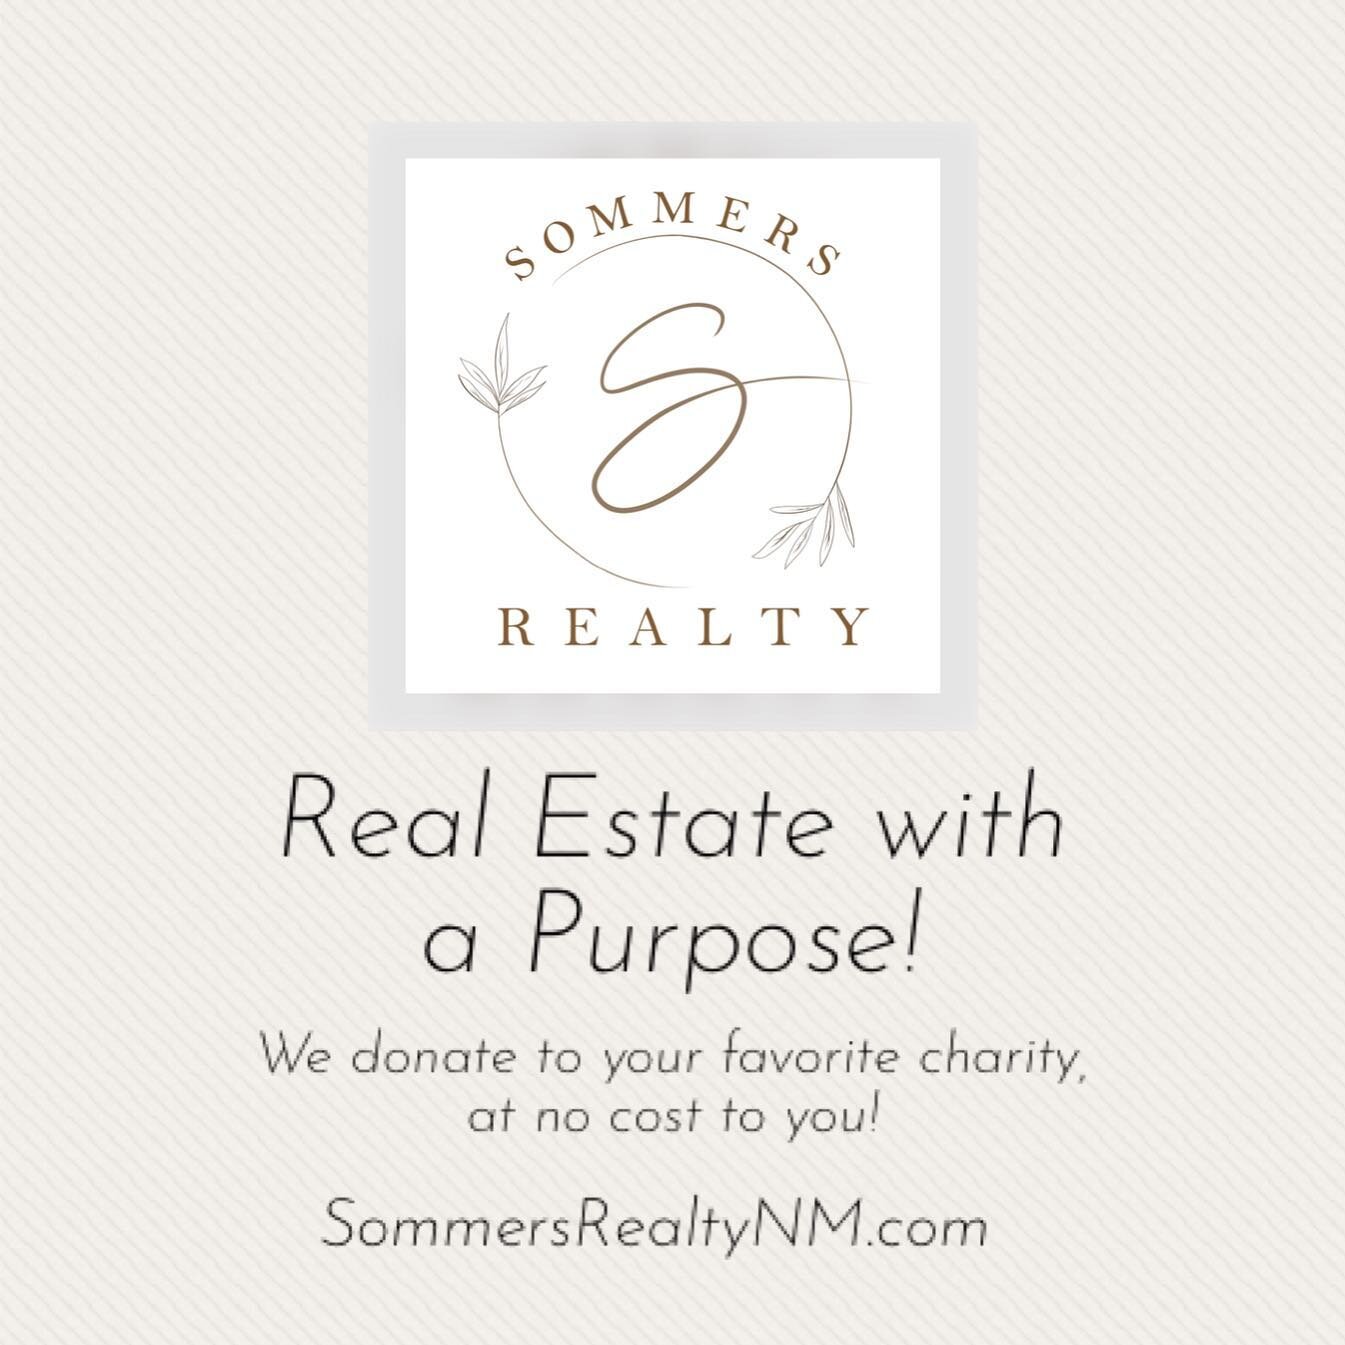 A big thanks to Sommers Realty! Their goal is to honor their clients and community by donating $500 to the local charity of their client&rsquo;s choice. @fathersnewmexico is one of three choices currently available when doing business with Sommers Re